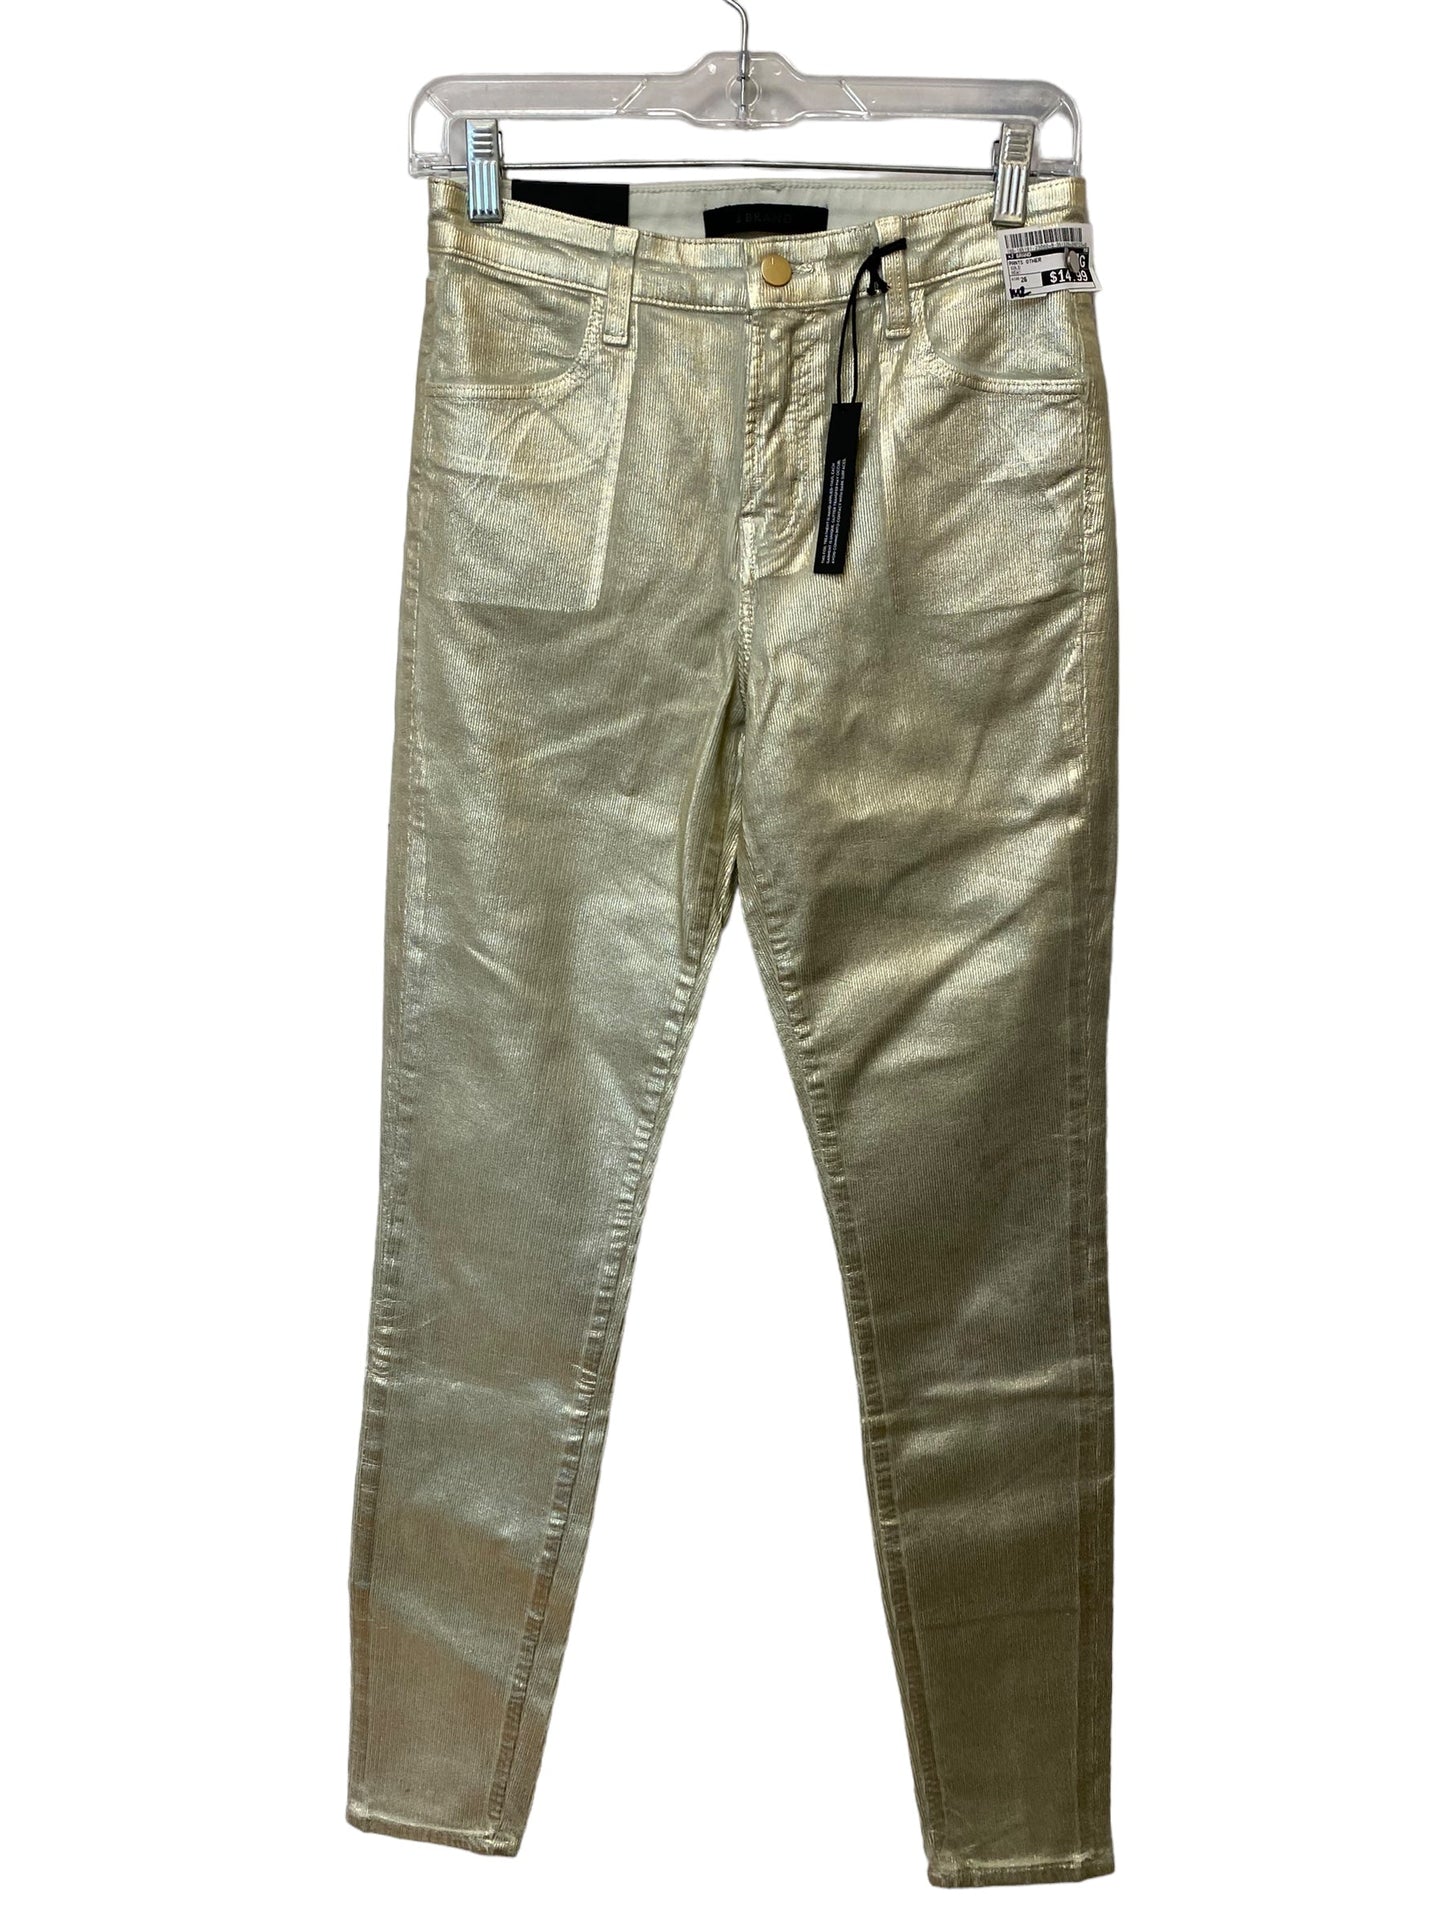 Gold Pants Other J Brand, Size 26